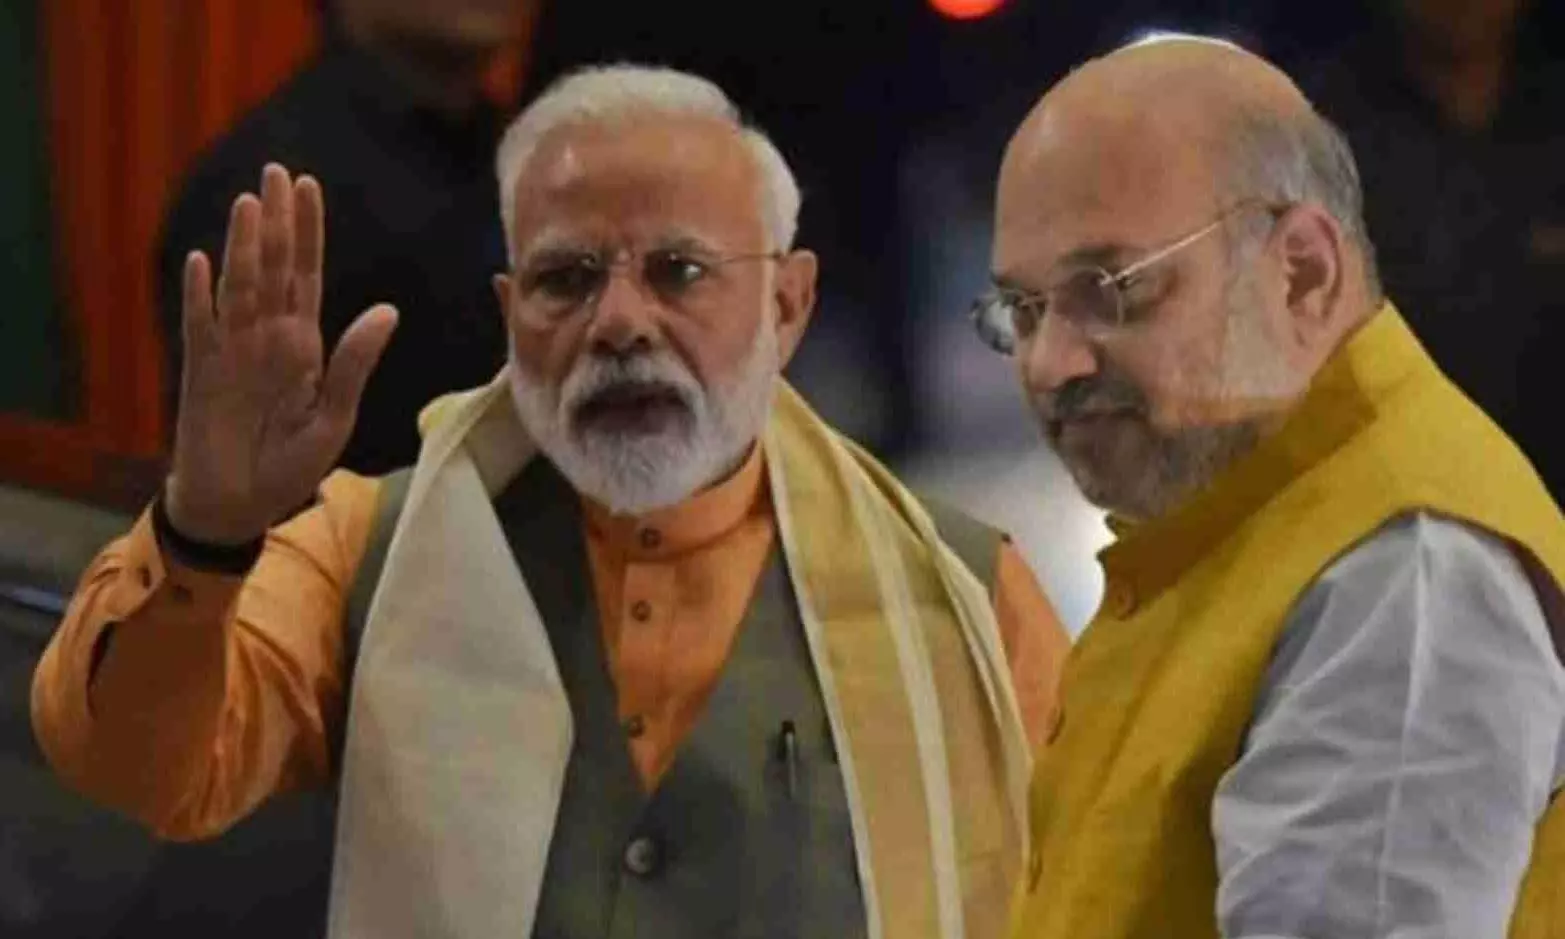 Amit Shah never before made this allegation that CBI pressured him to frame PM Modi